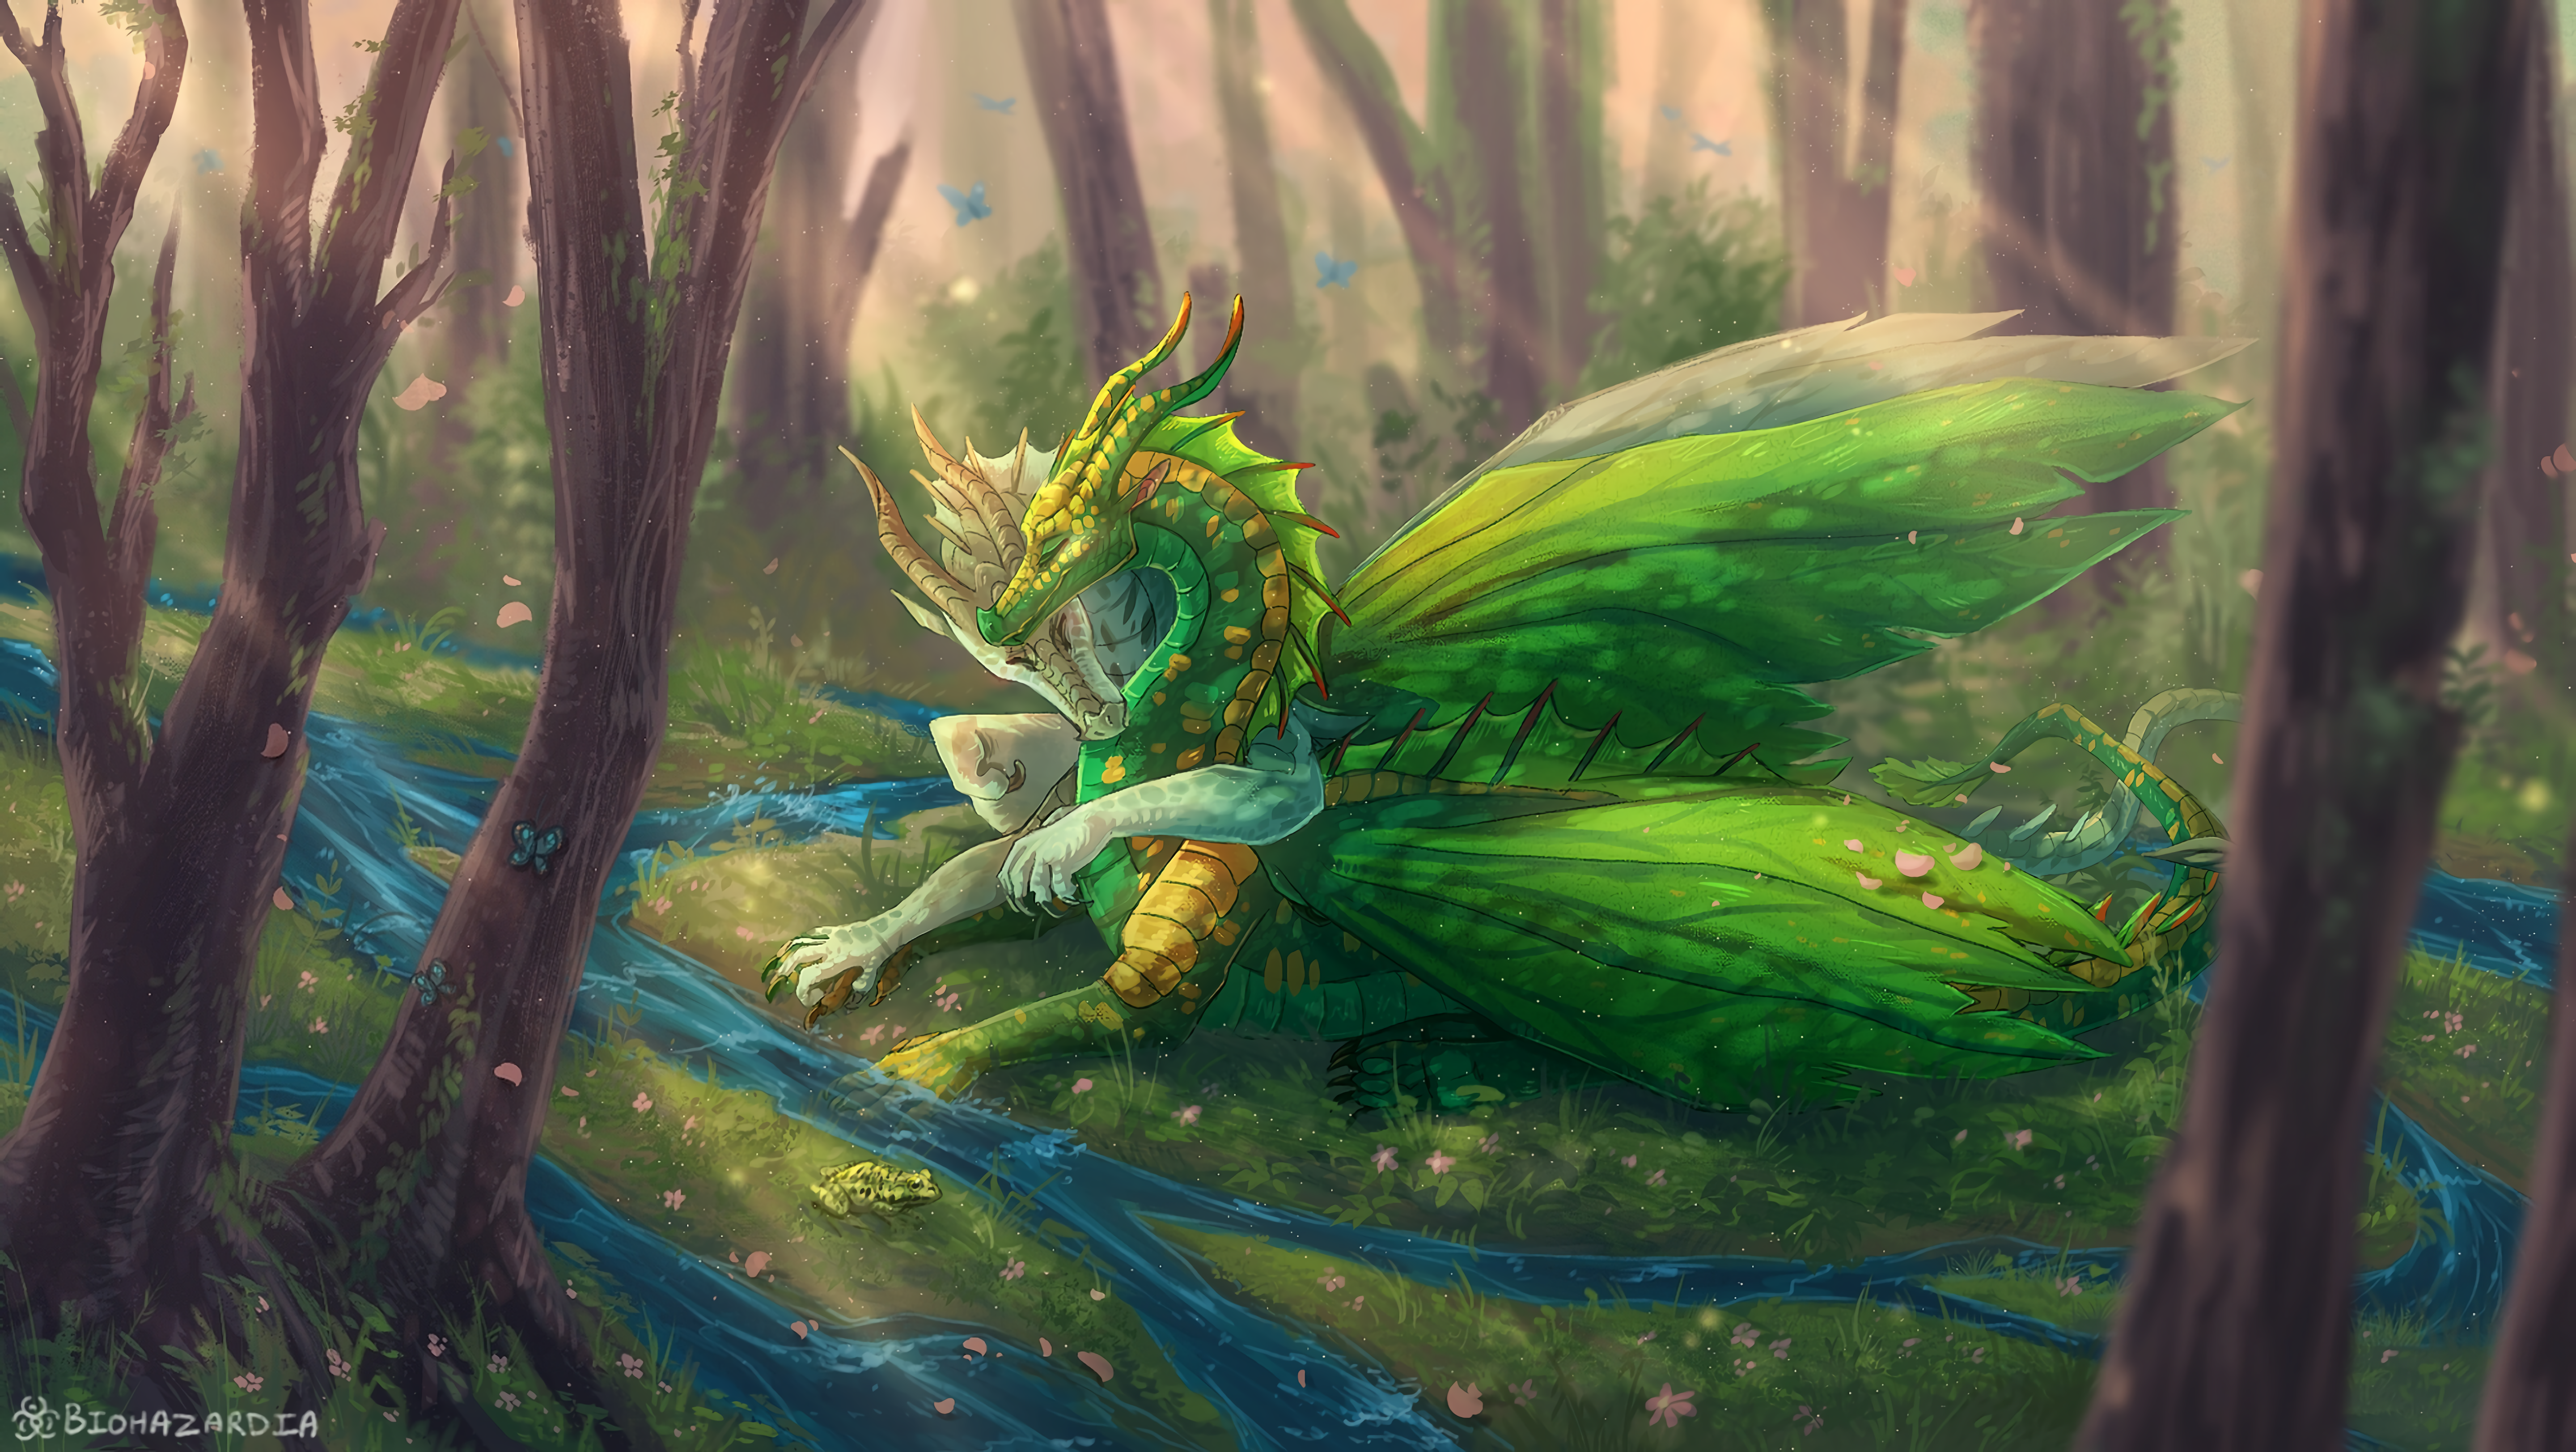 Wings of Fire and Willow by .reddit.com